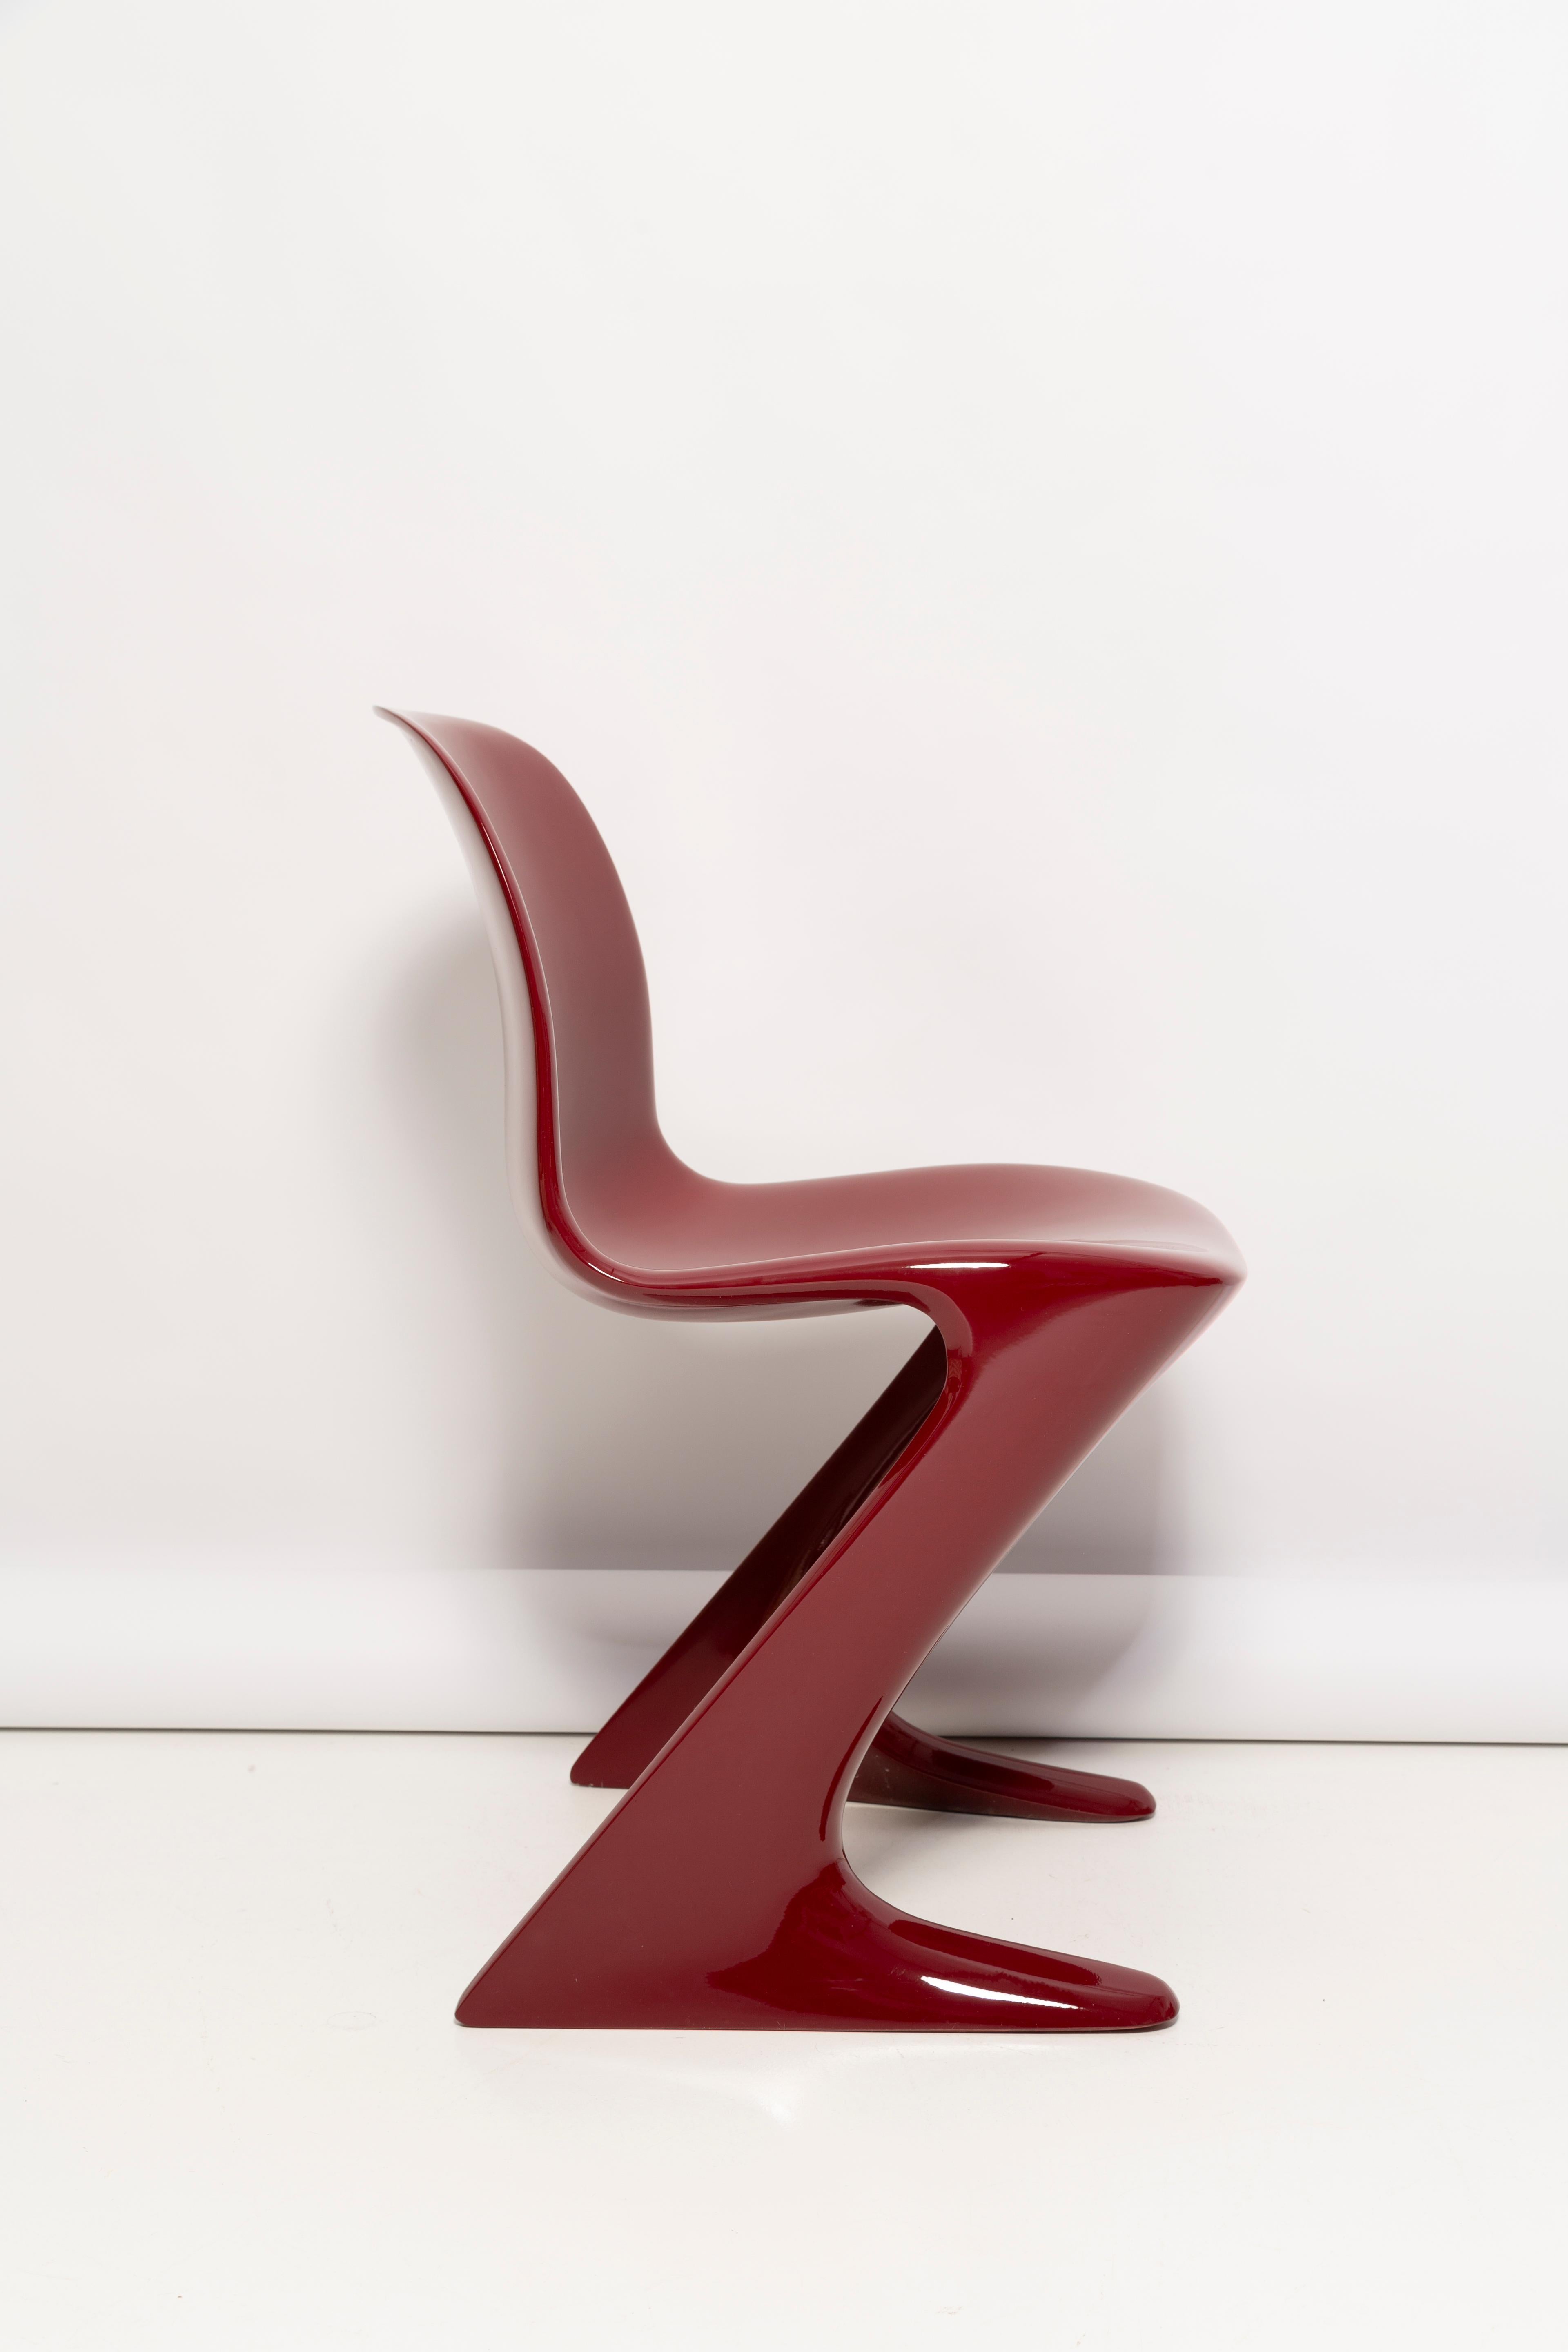 20th Century Pair of Dark Red Wine Kangaroo Chairs Designed by Ernst Moeckl, Germany, 1968 For Sale